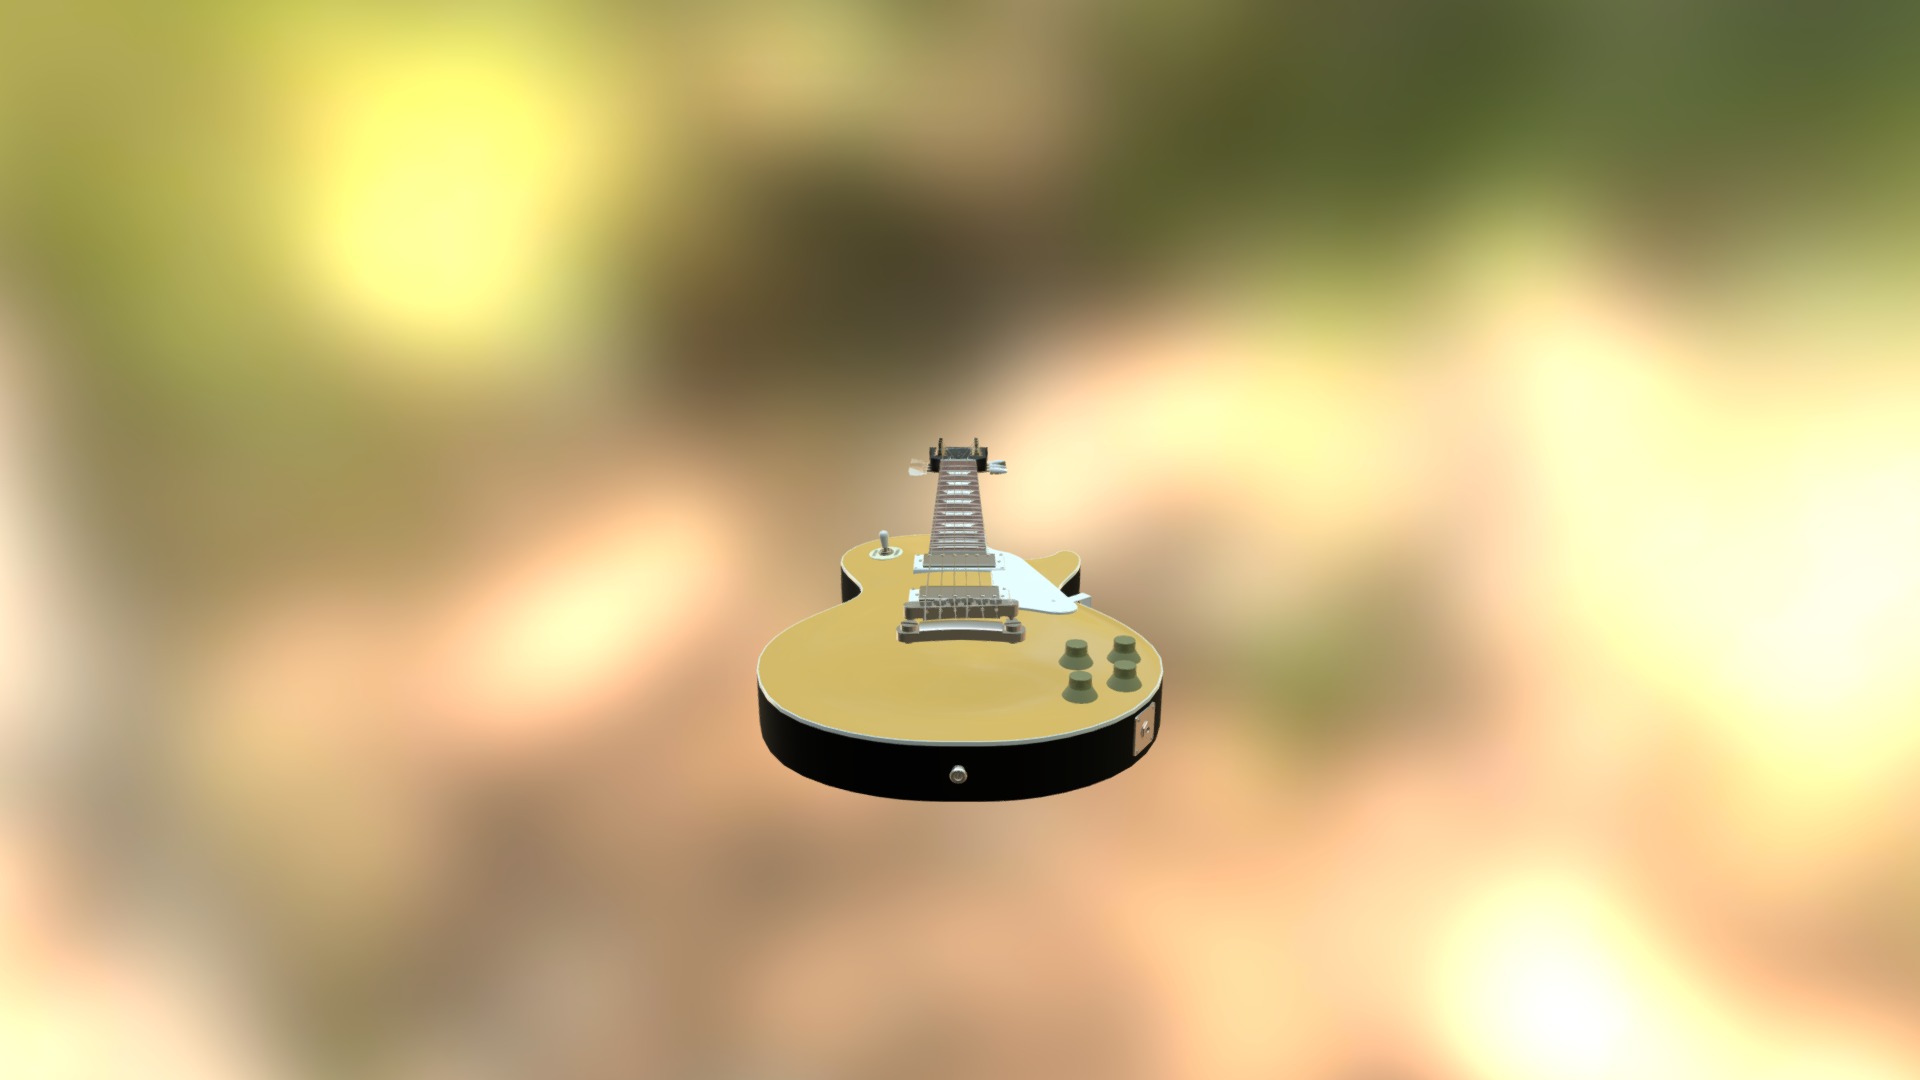 3D model Gibson Les Paul - This is a 3D model of the Gibson Les Paul. The 3D model is about a guitar on a stand.